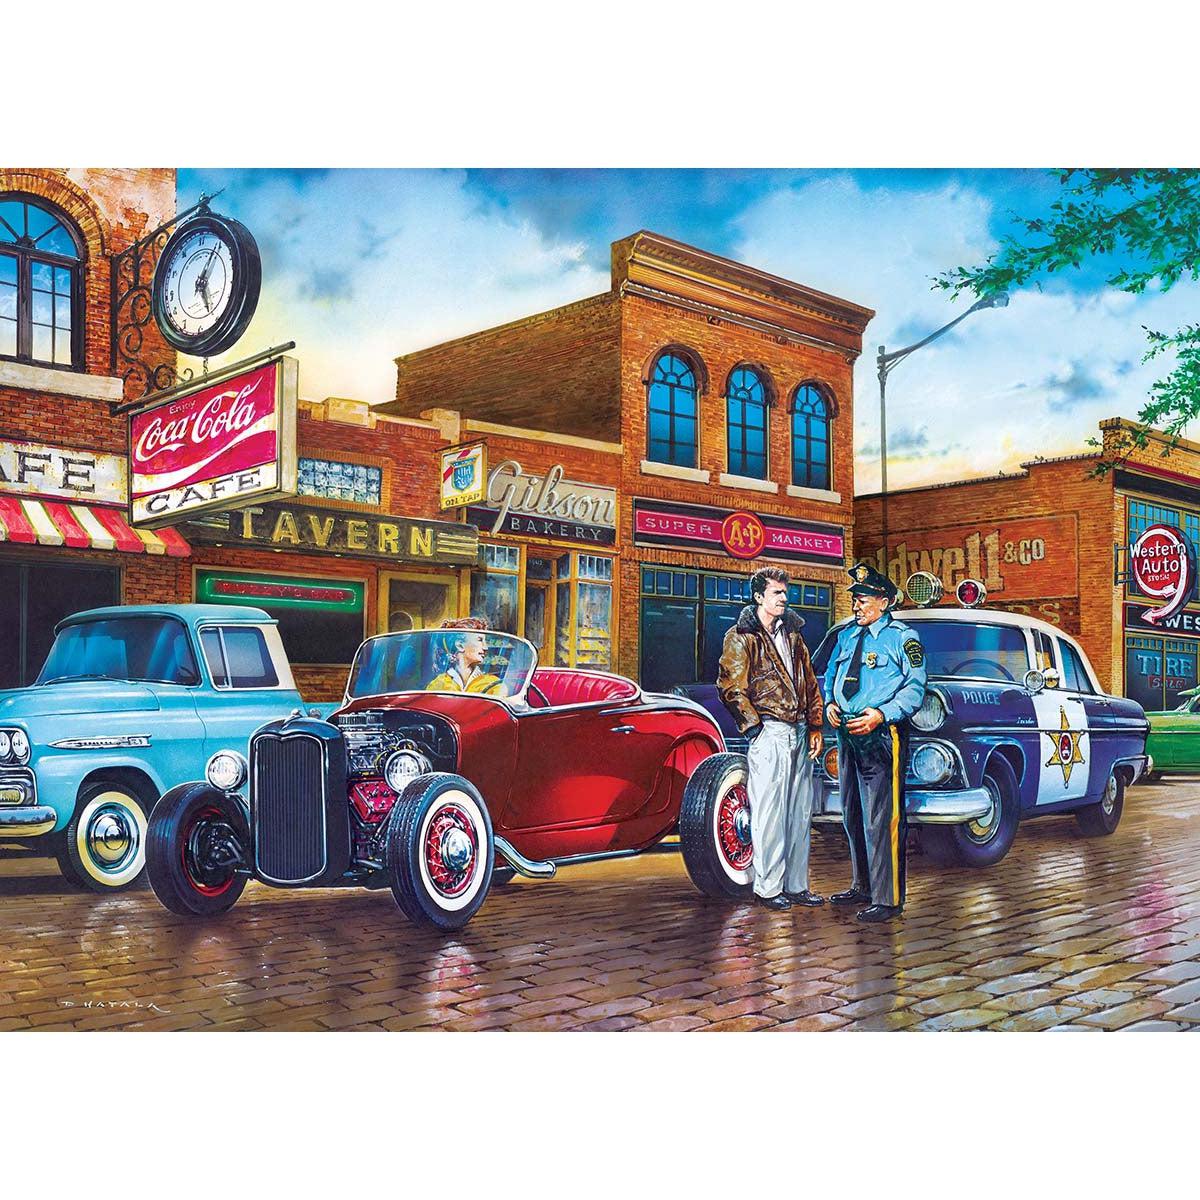 MasterPieces-Hometown Heroes - A Little Too Loud - 1000 Piece Puzzle-71954-Legacy Toys